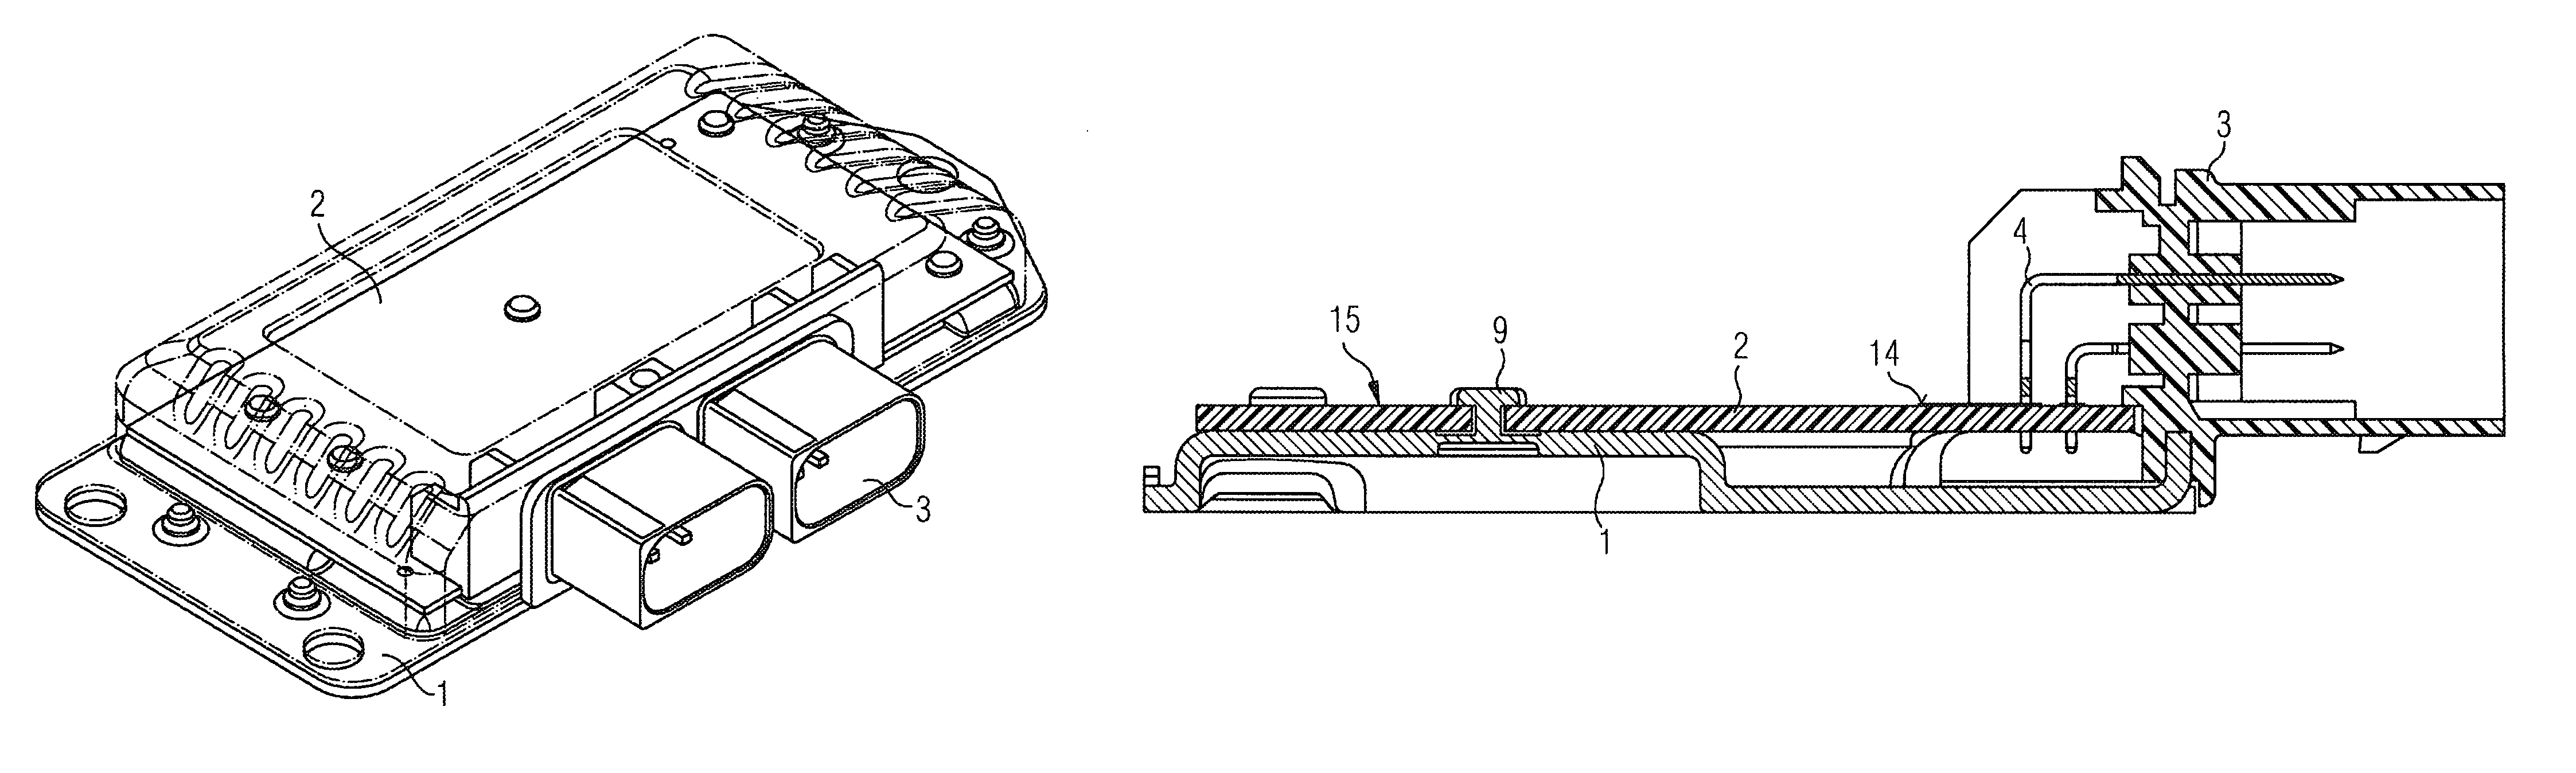 Electric device having a plastic plug part arranged on a circuit support